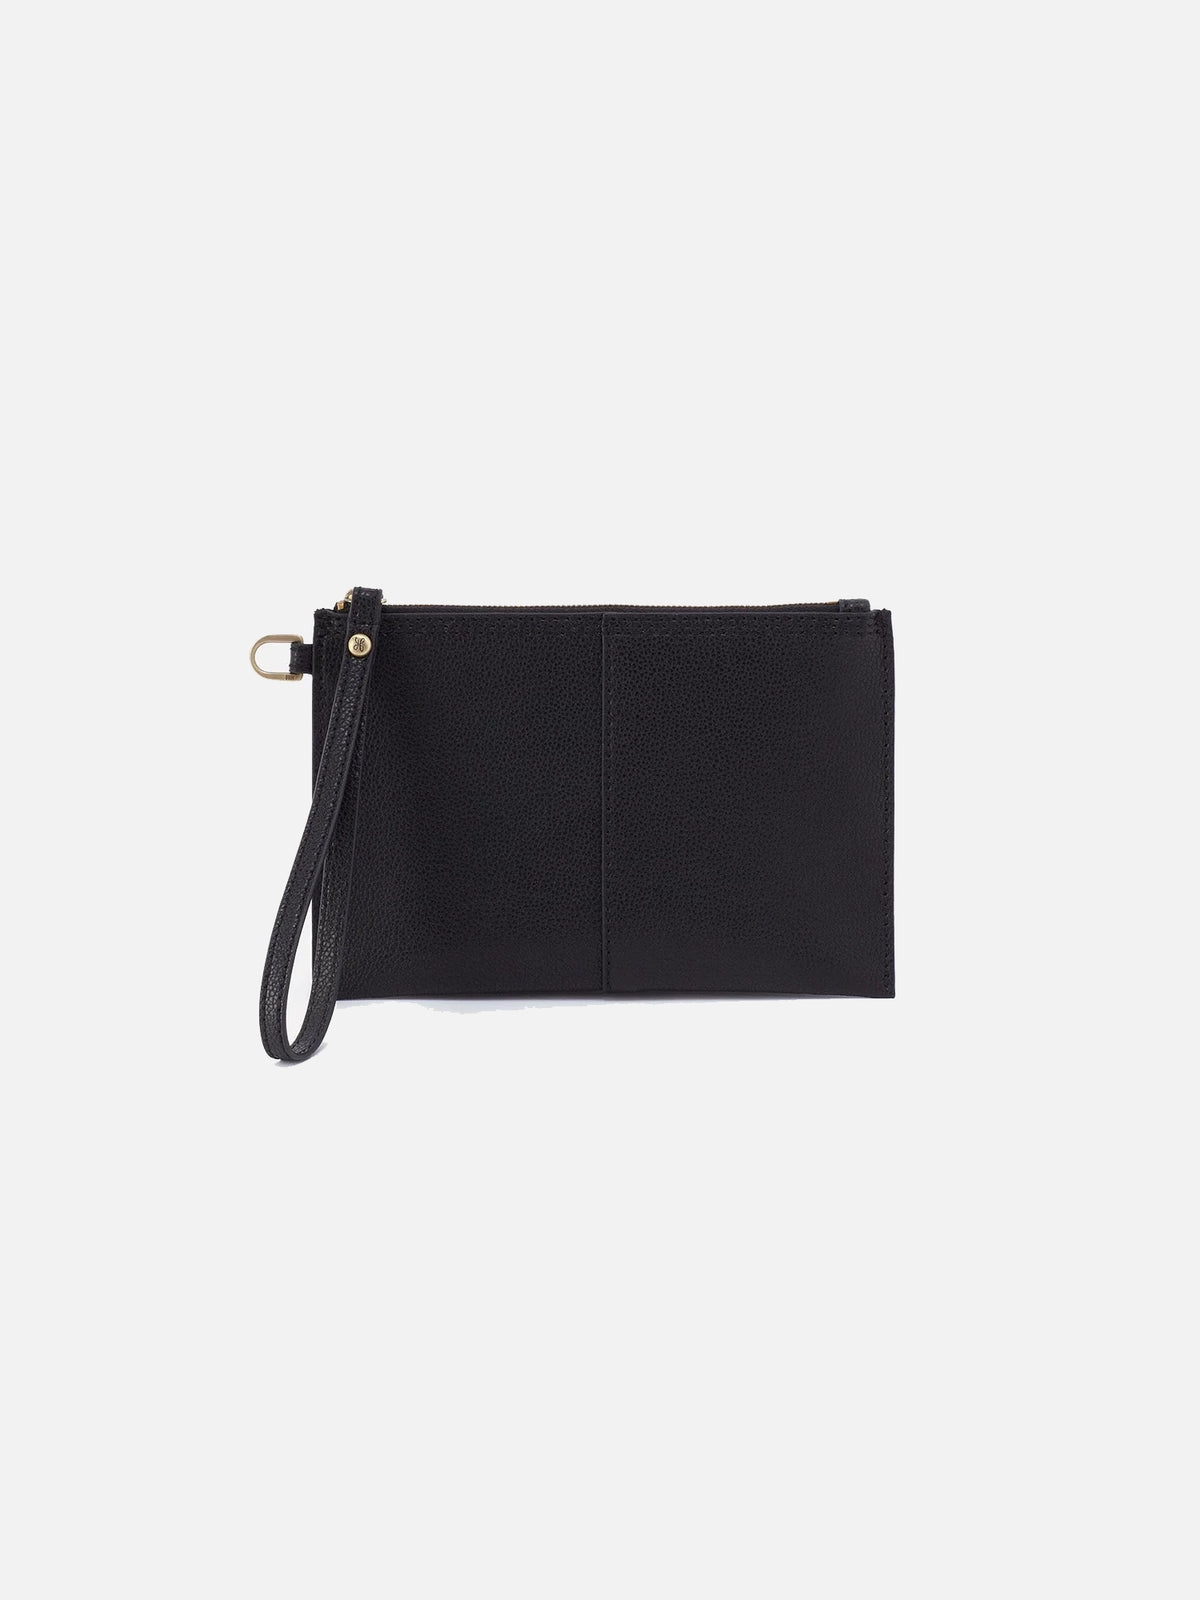 hobo vida small pouch in black micro pebbled leather